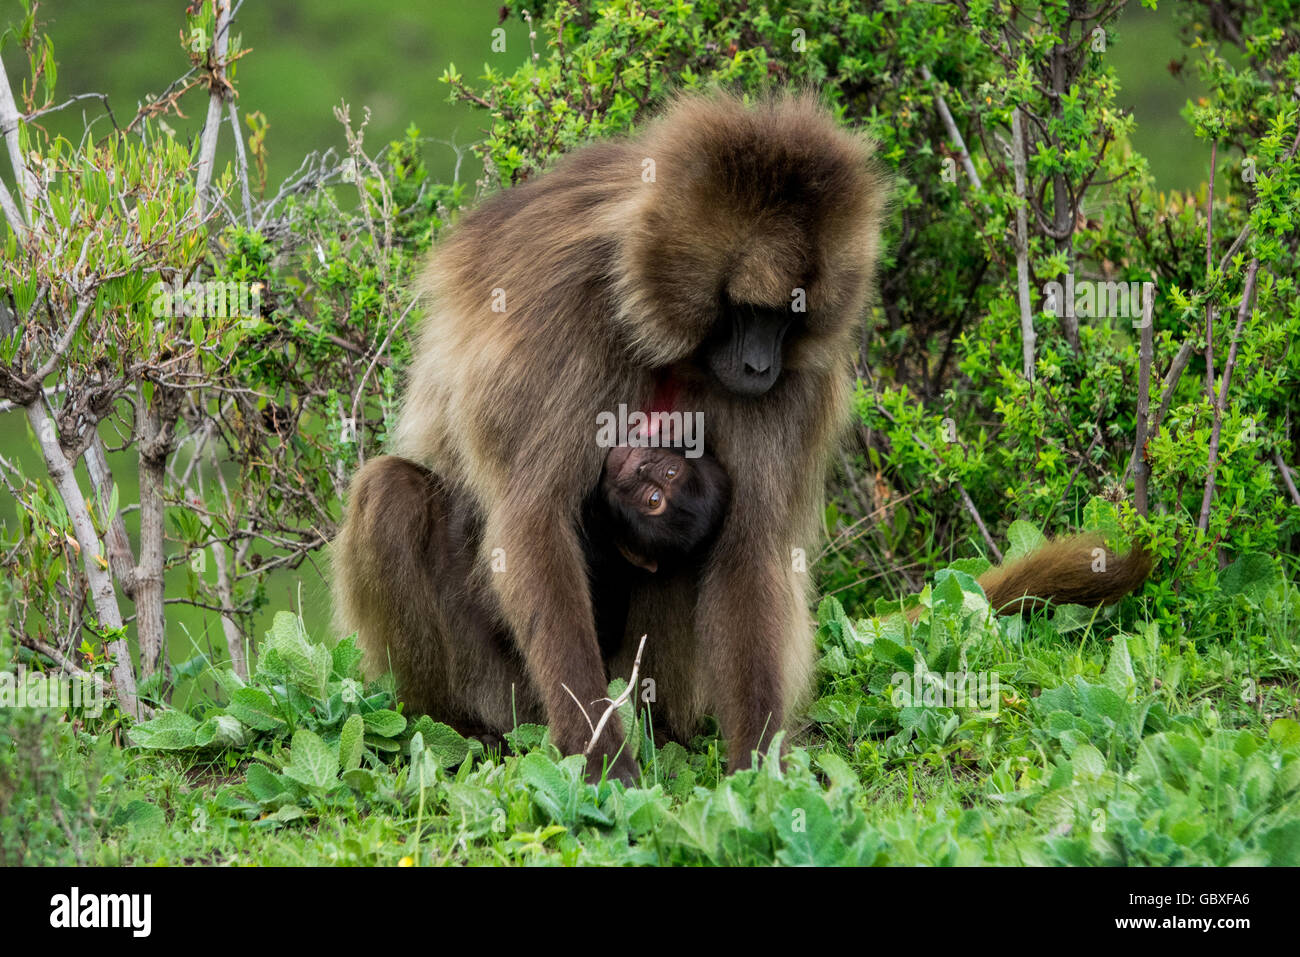 a baby gelada (a species of Old World monkey) clings to it's mother in the Simien Mountains, Ethiopia Stock Photo